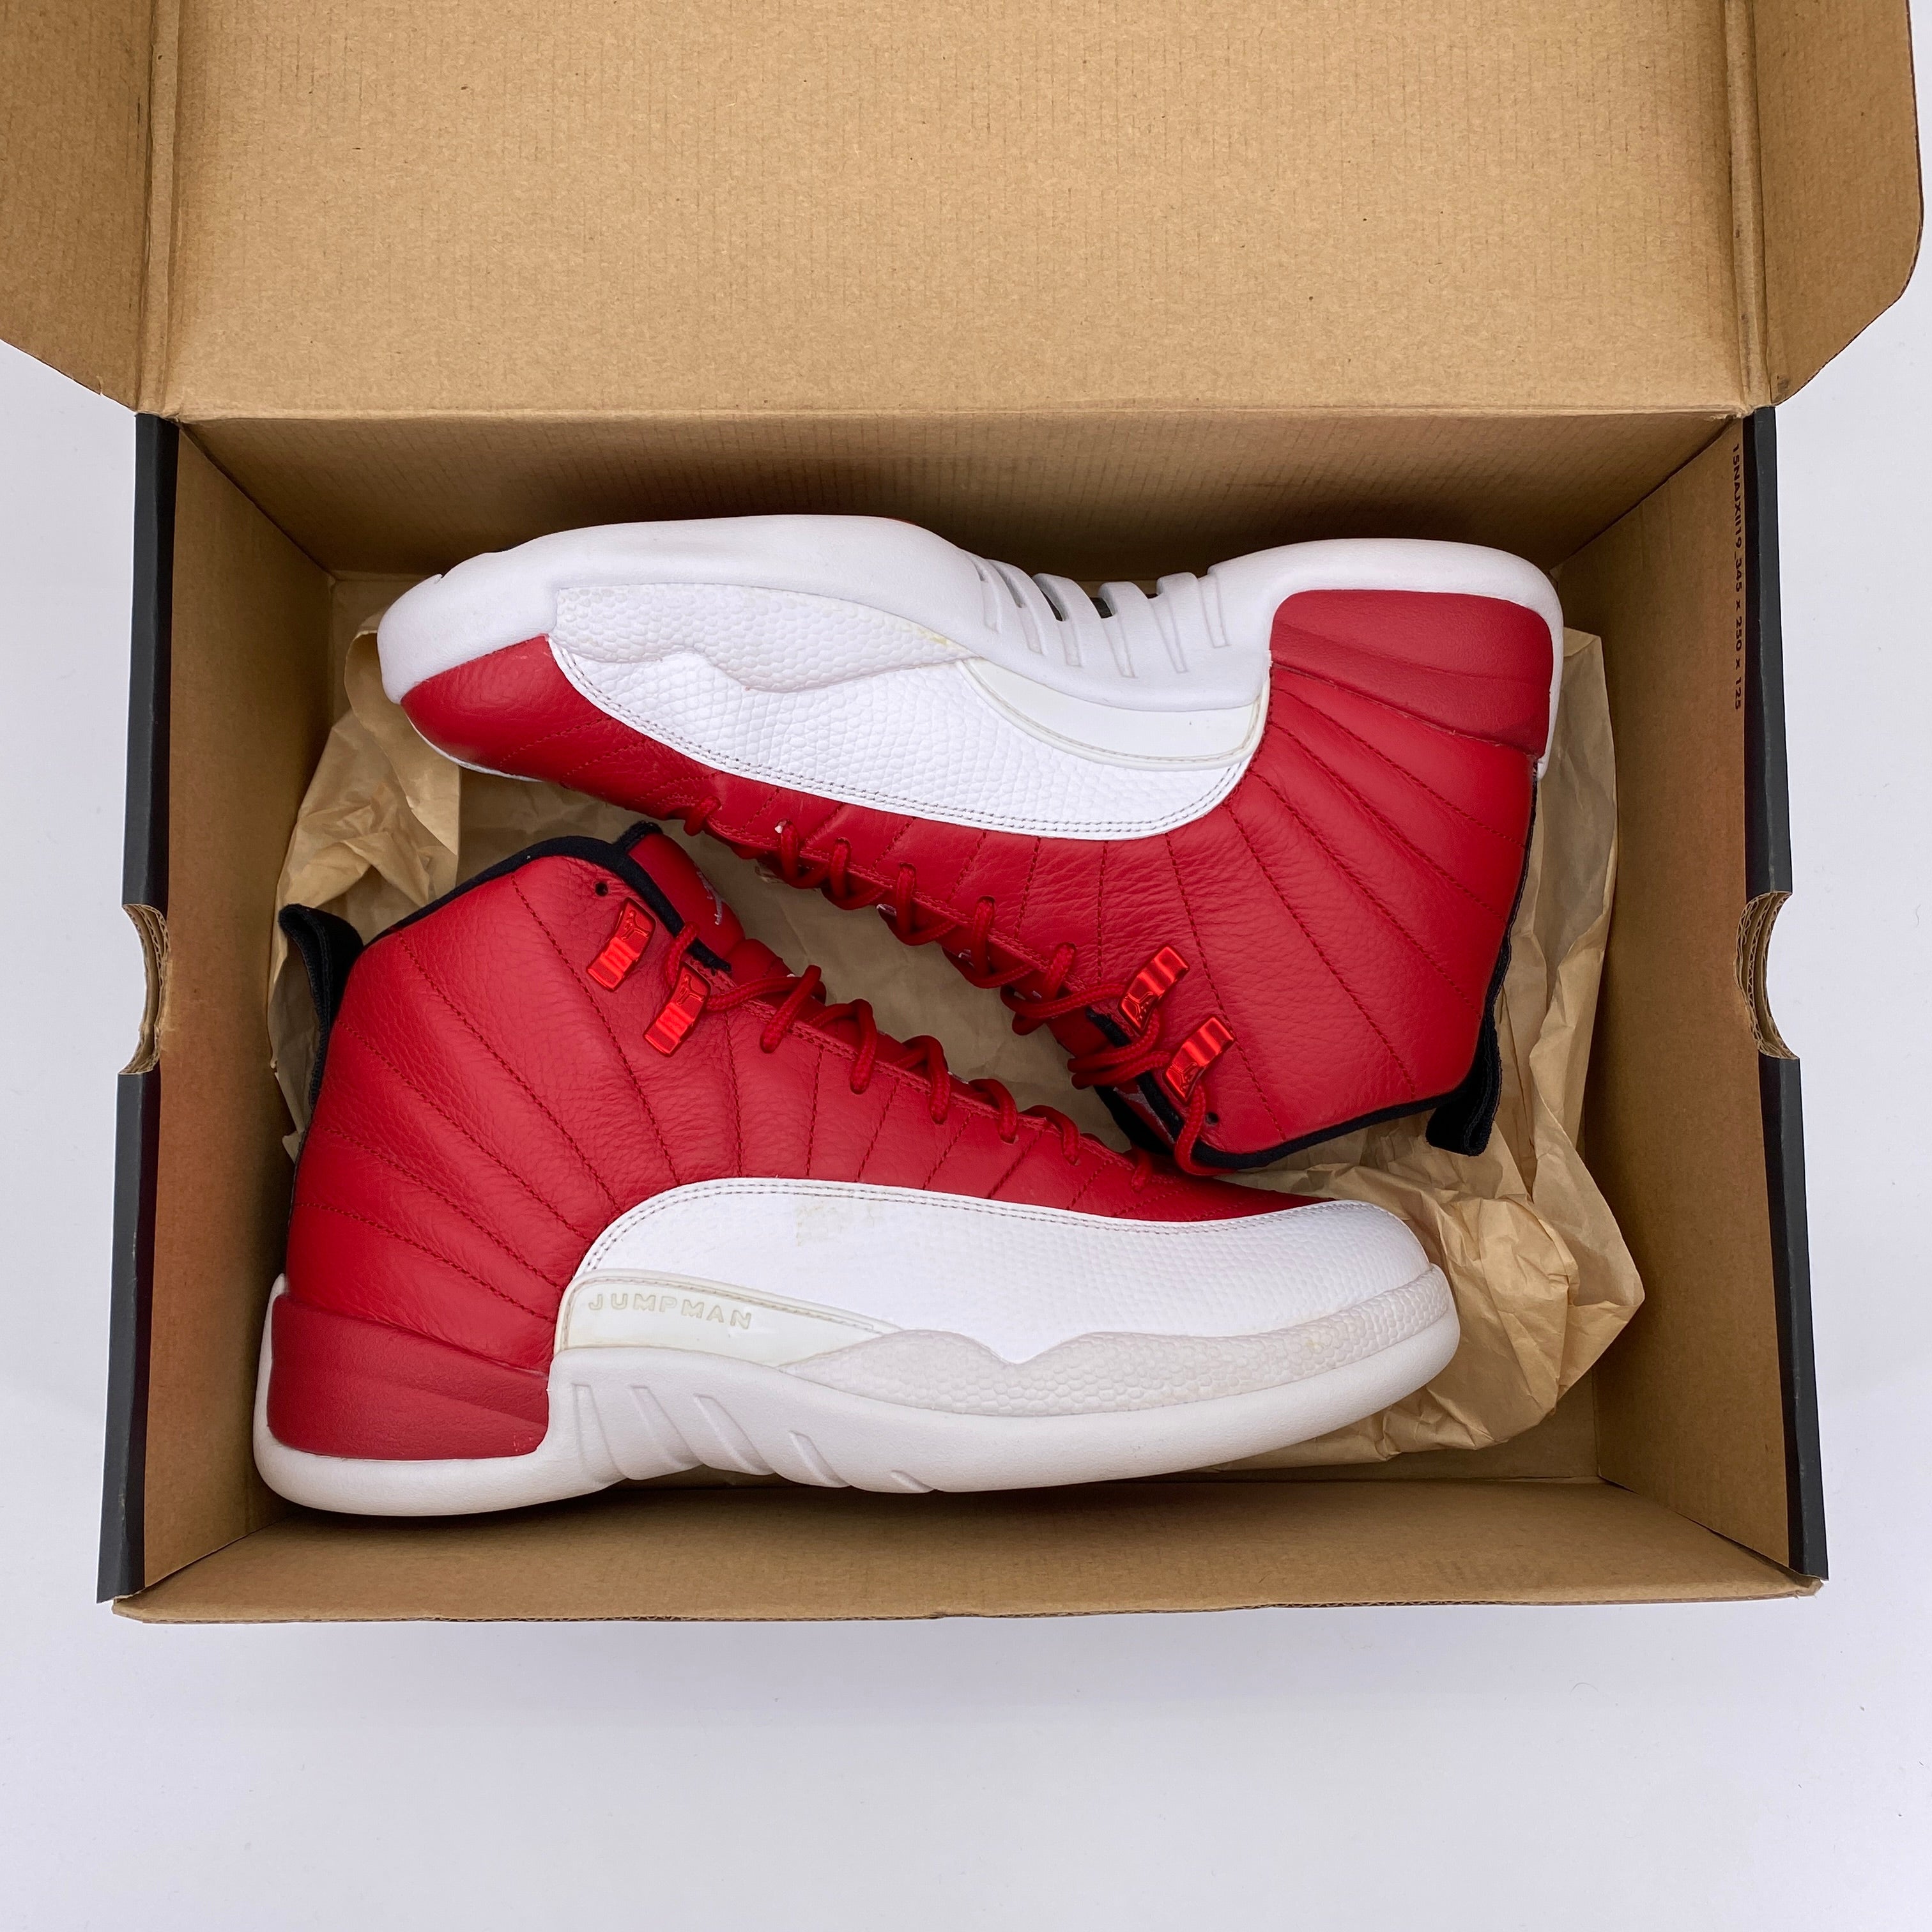 Air Jordan 12 Retro &quot;Gym Red&quot; 2016 Used Size 8.5